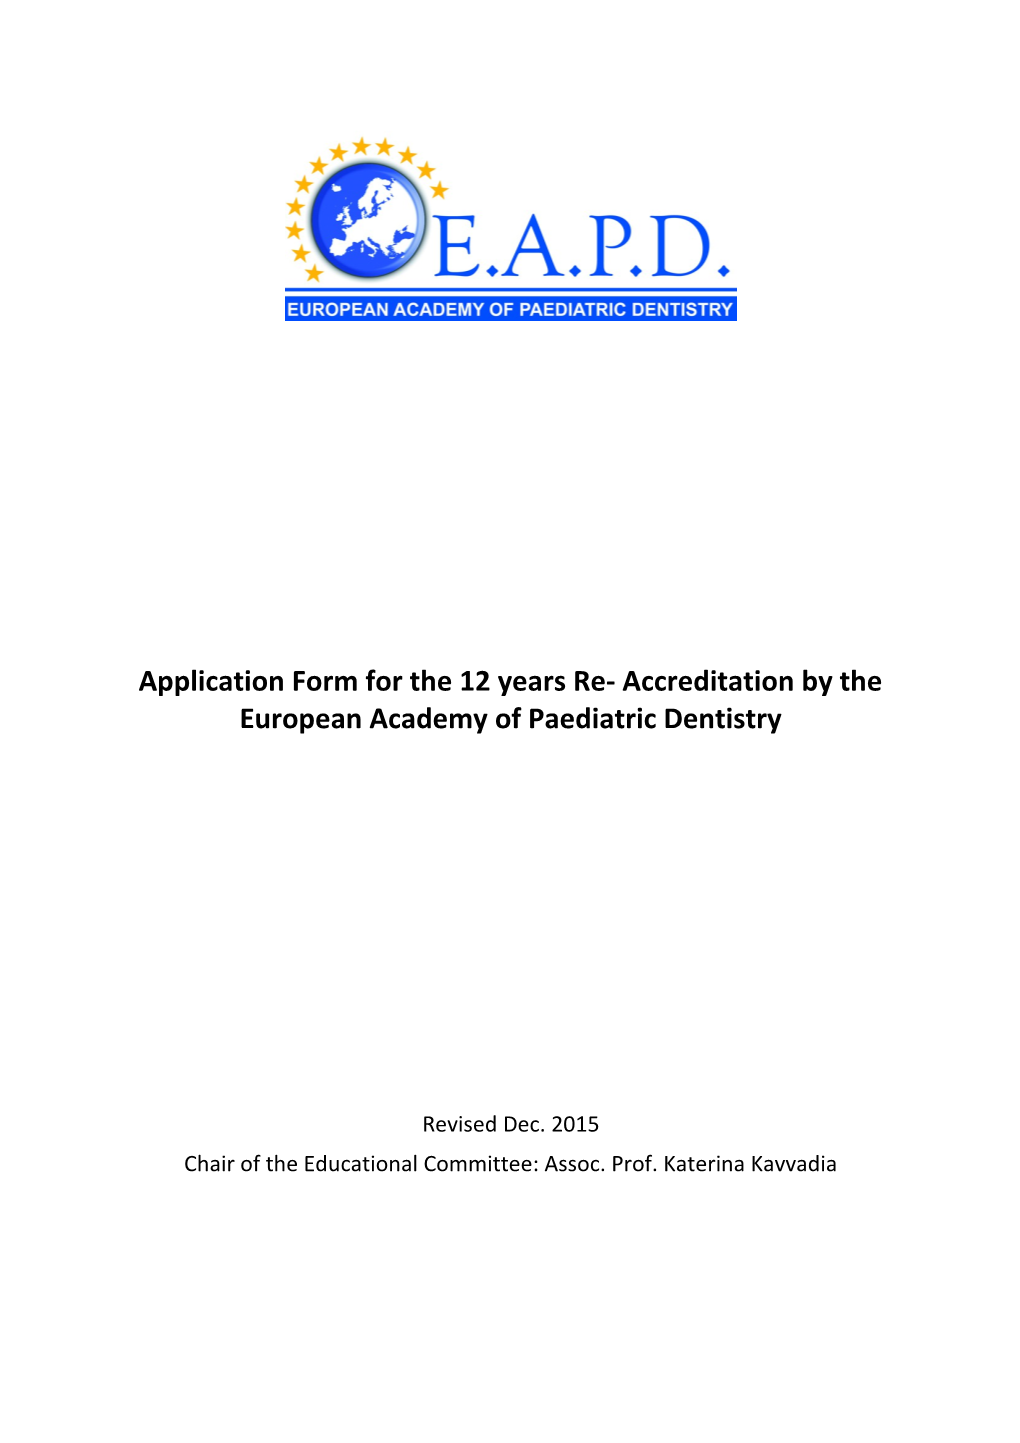 Application Form for the 12 Years Re- Accreditation by the European Academy of Paediatric